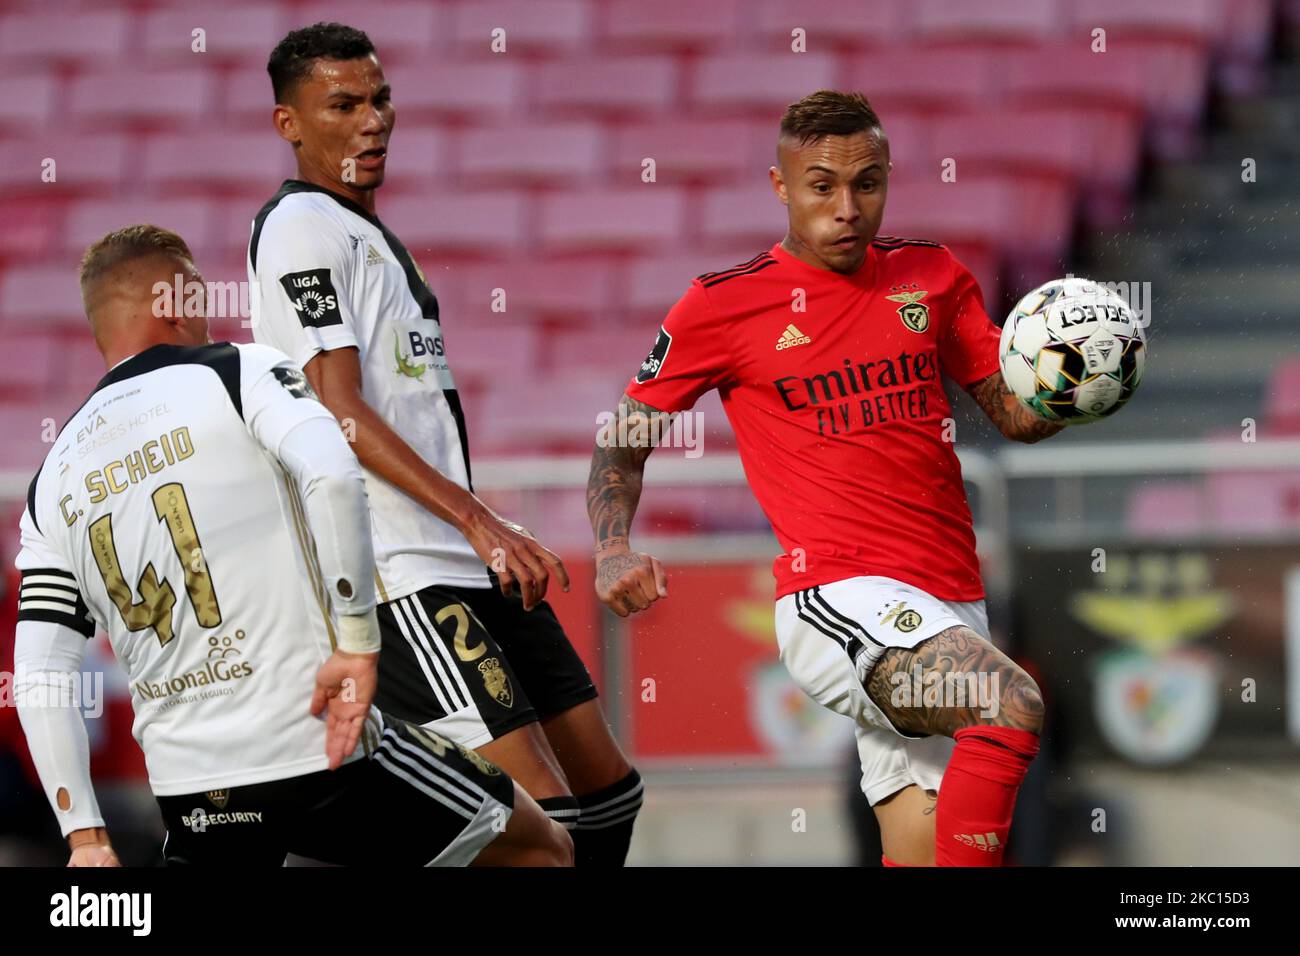 Everton of SL Benfica (R ) vies with Claudio Falcao of SC Farense (C ) and Cassio Scheid(L) during the Portuguese League football match between SL Benfica and SC Farense at the Luz stadium in Lisbon, Portugal on October 4, 2020. (Photo by Pedro FiÃºza/NurPhoto) Stock Photo